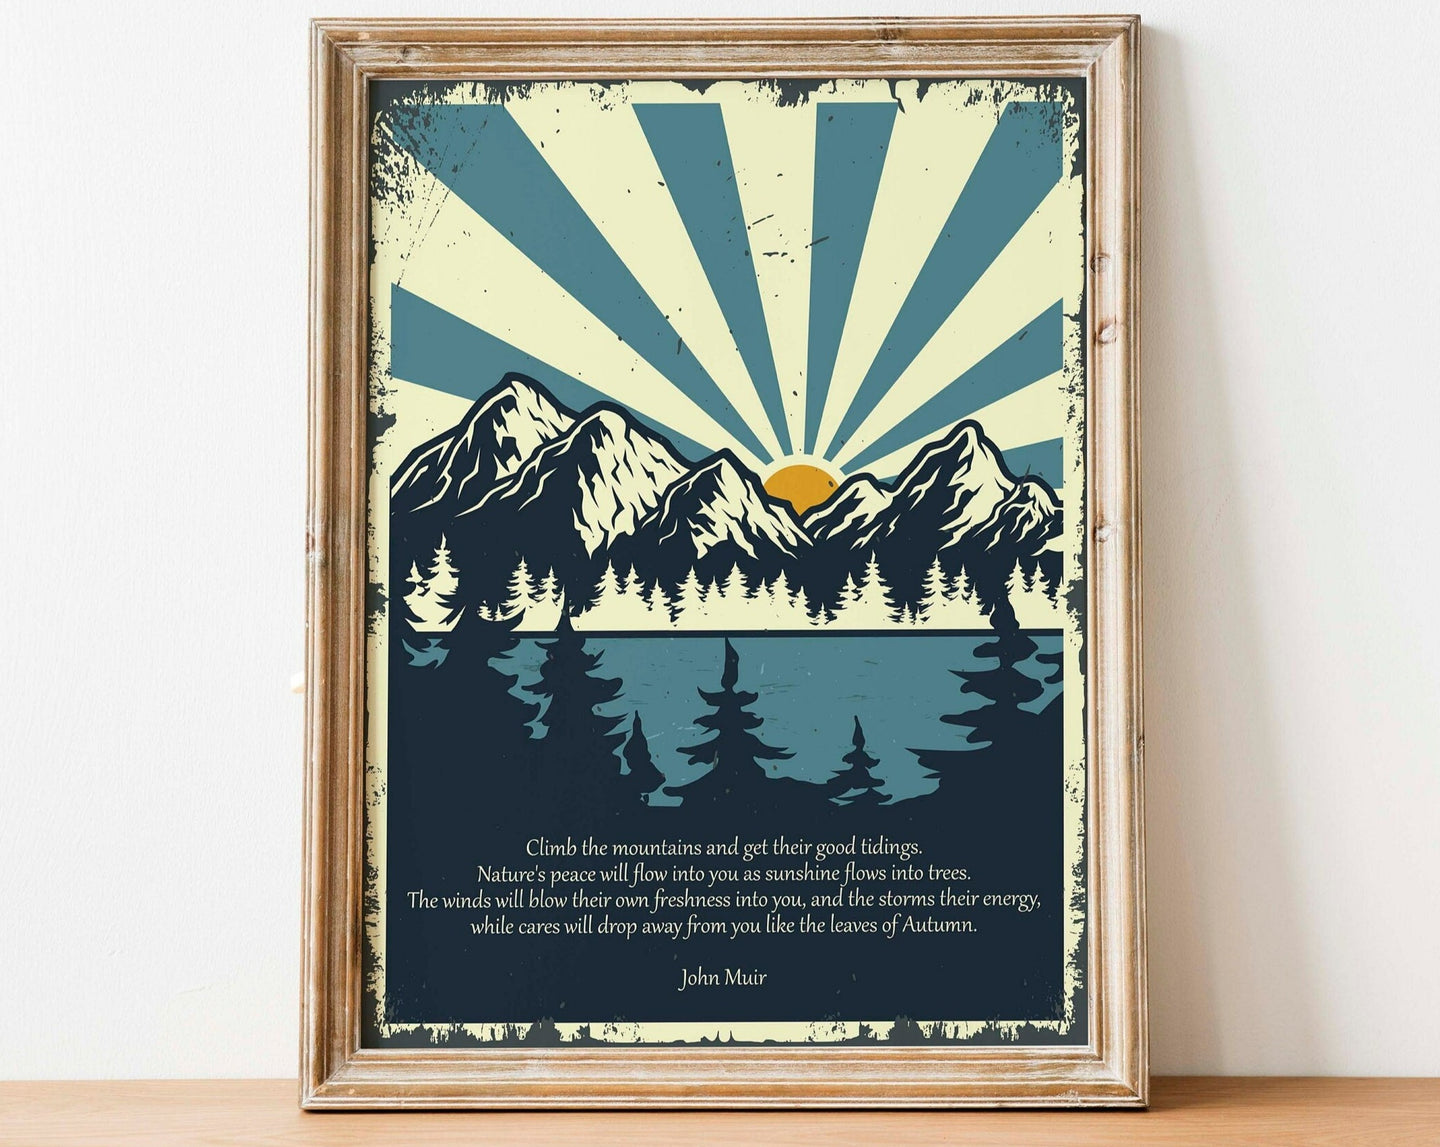 Climb the mountains and get their good tidings - John Muir Quote - Travel wall art - Mountain Poetry art